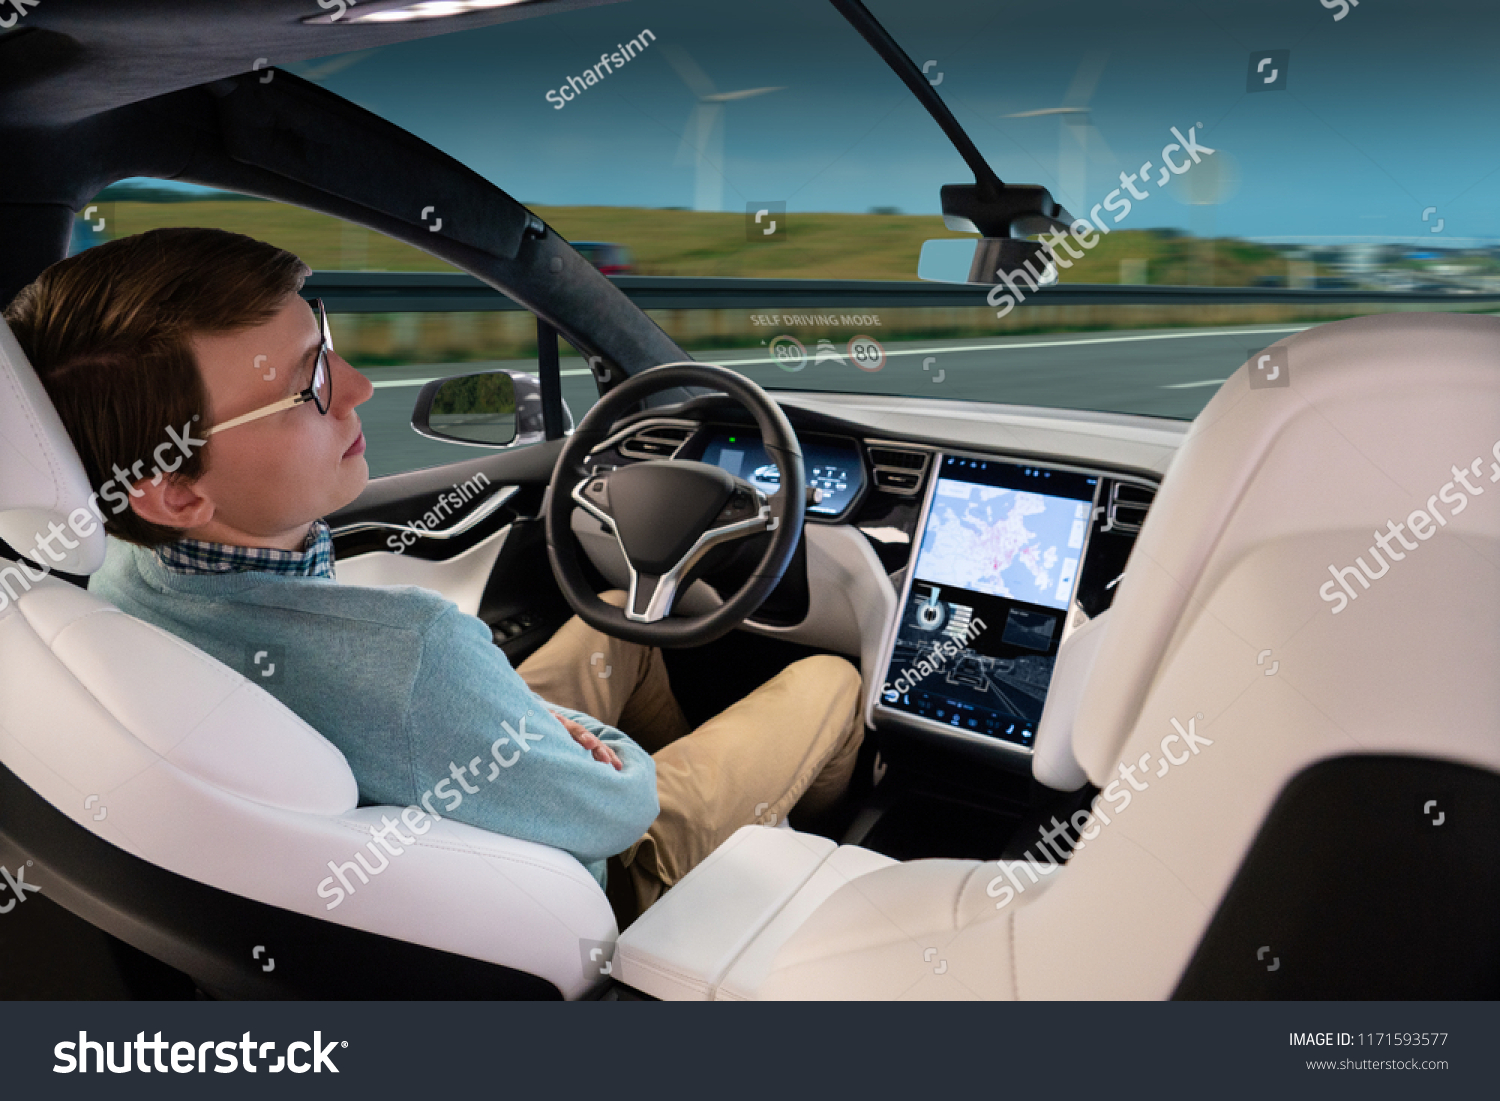 A man sleeps while his car is driven by an autopilot. Self driving vehicle concept #1171593577